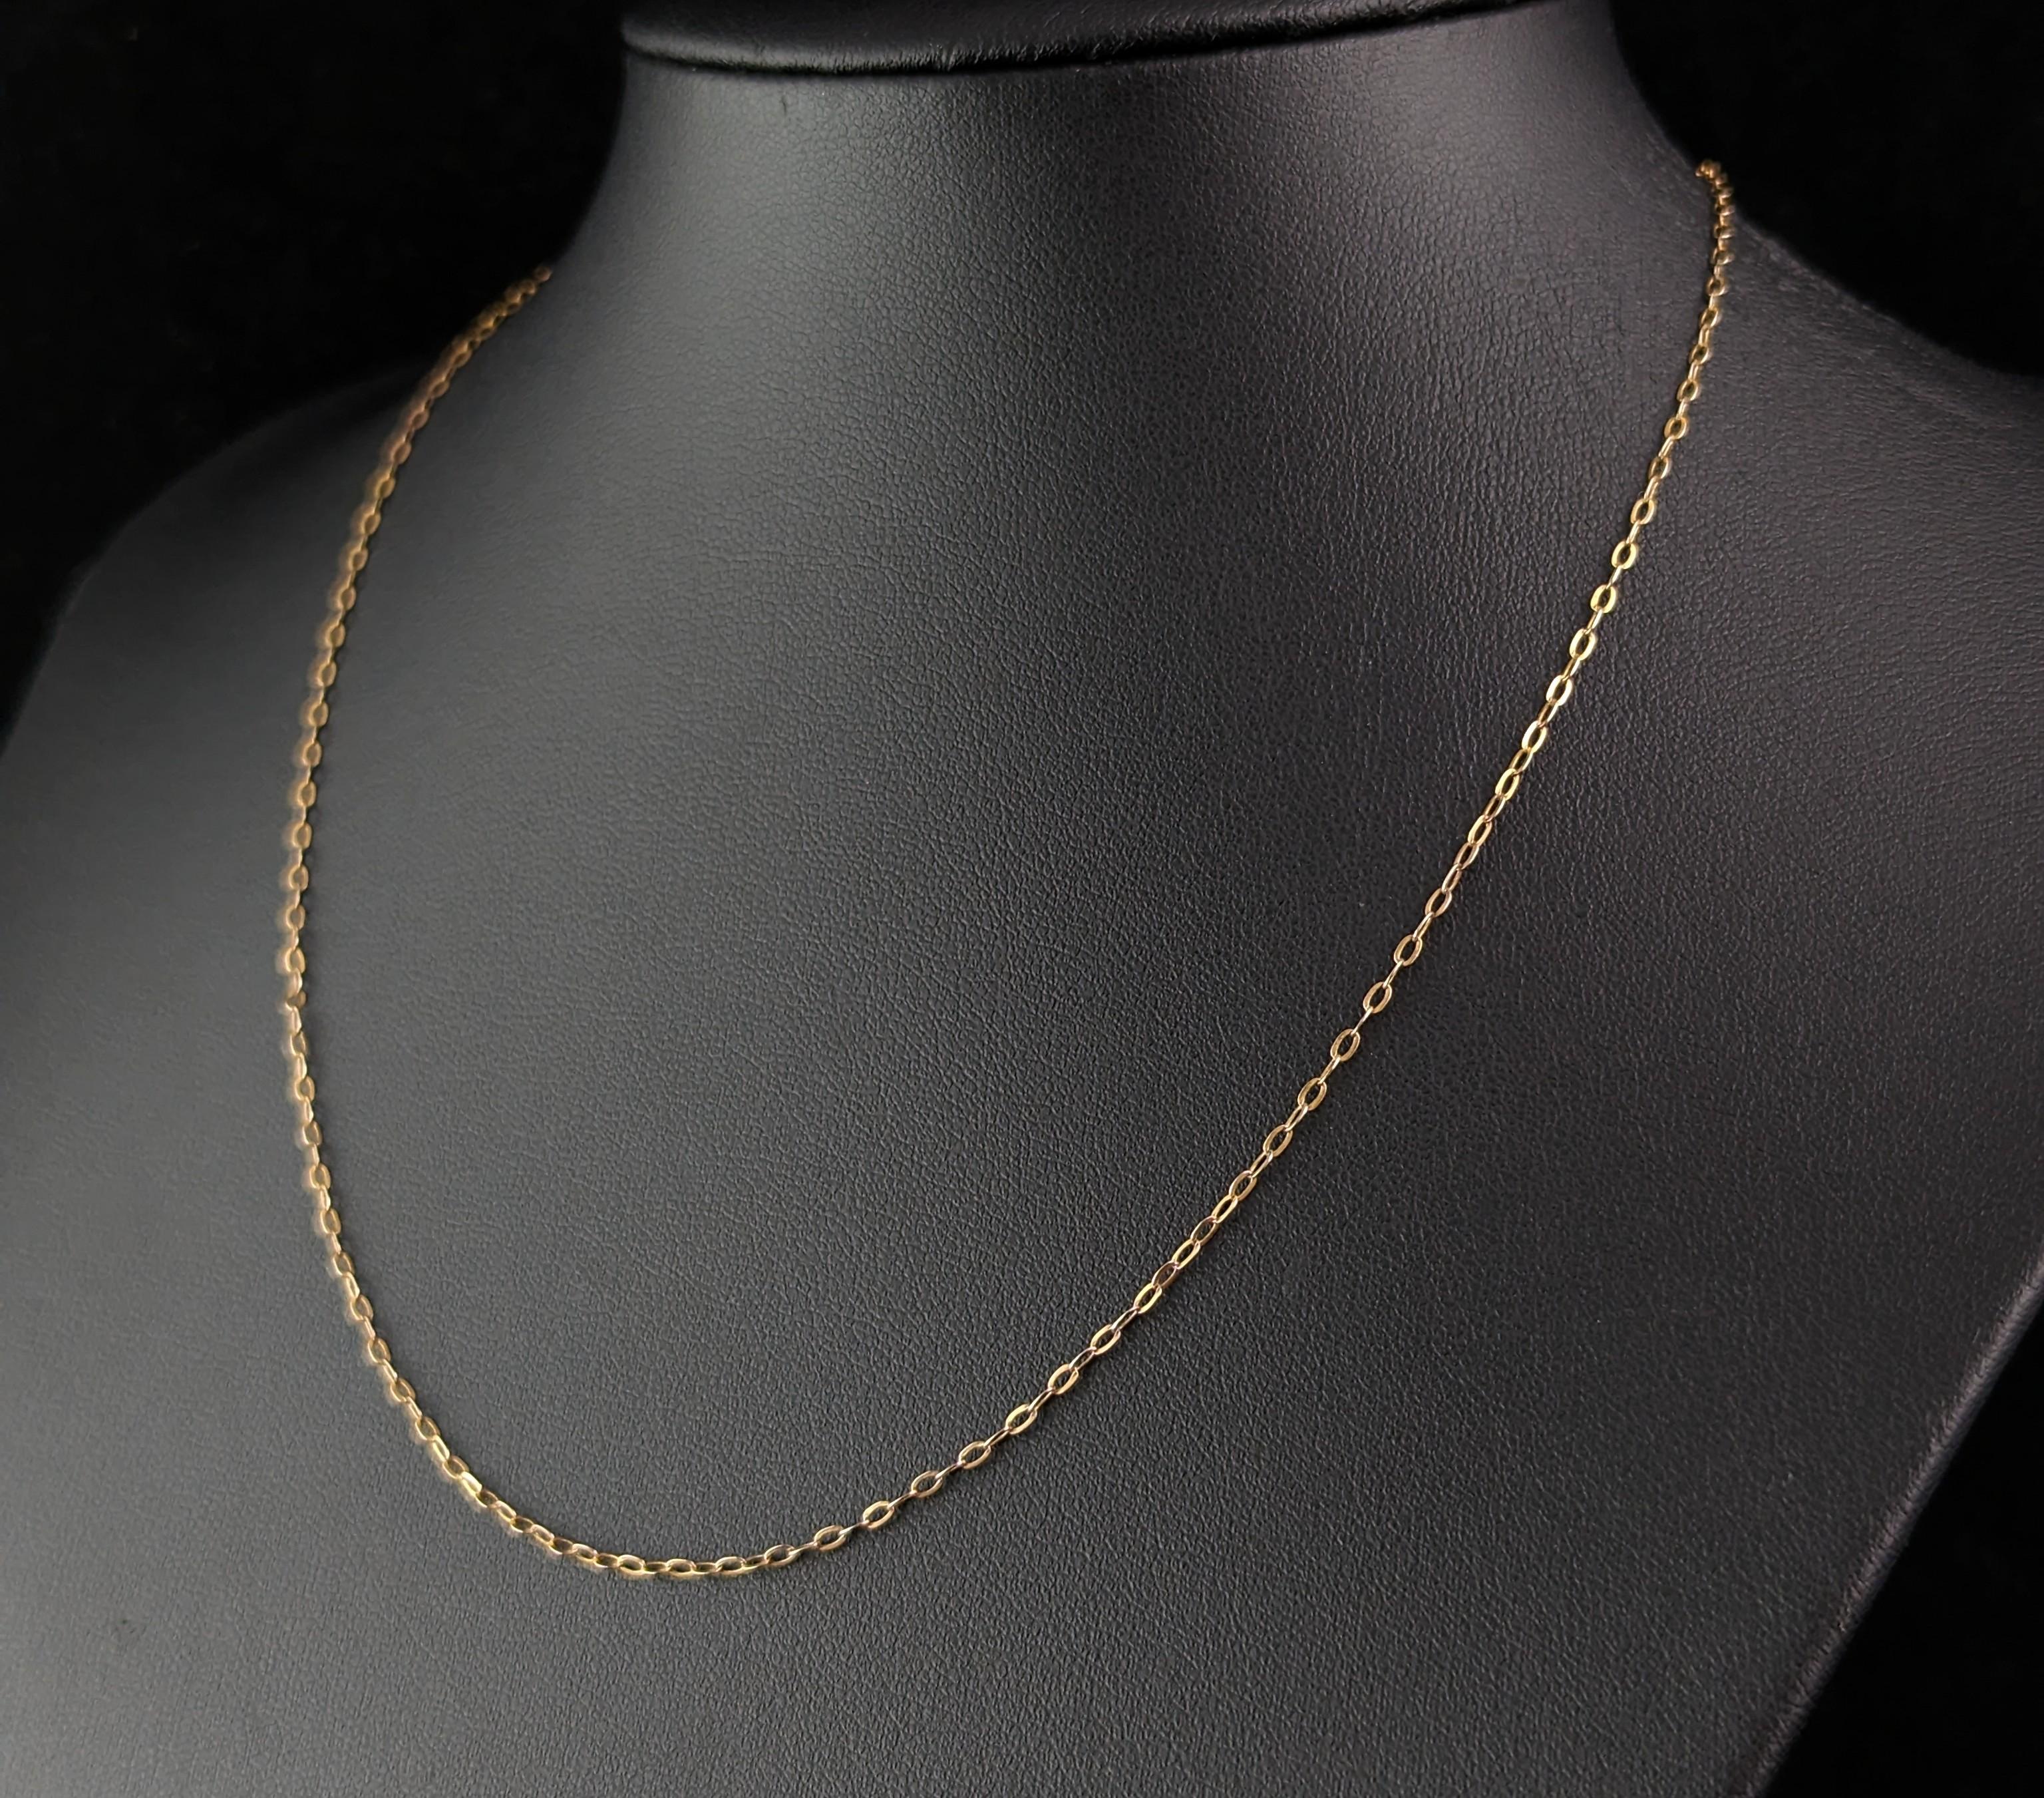 Edwardian Antique 9k yellow gold trace chain necklace, dainty 